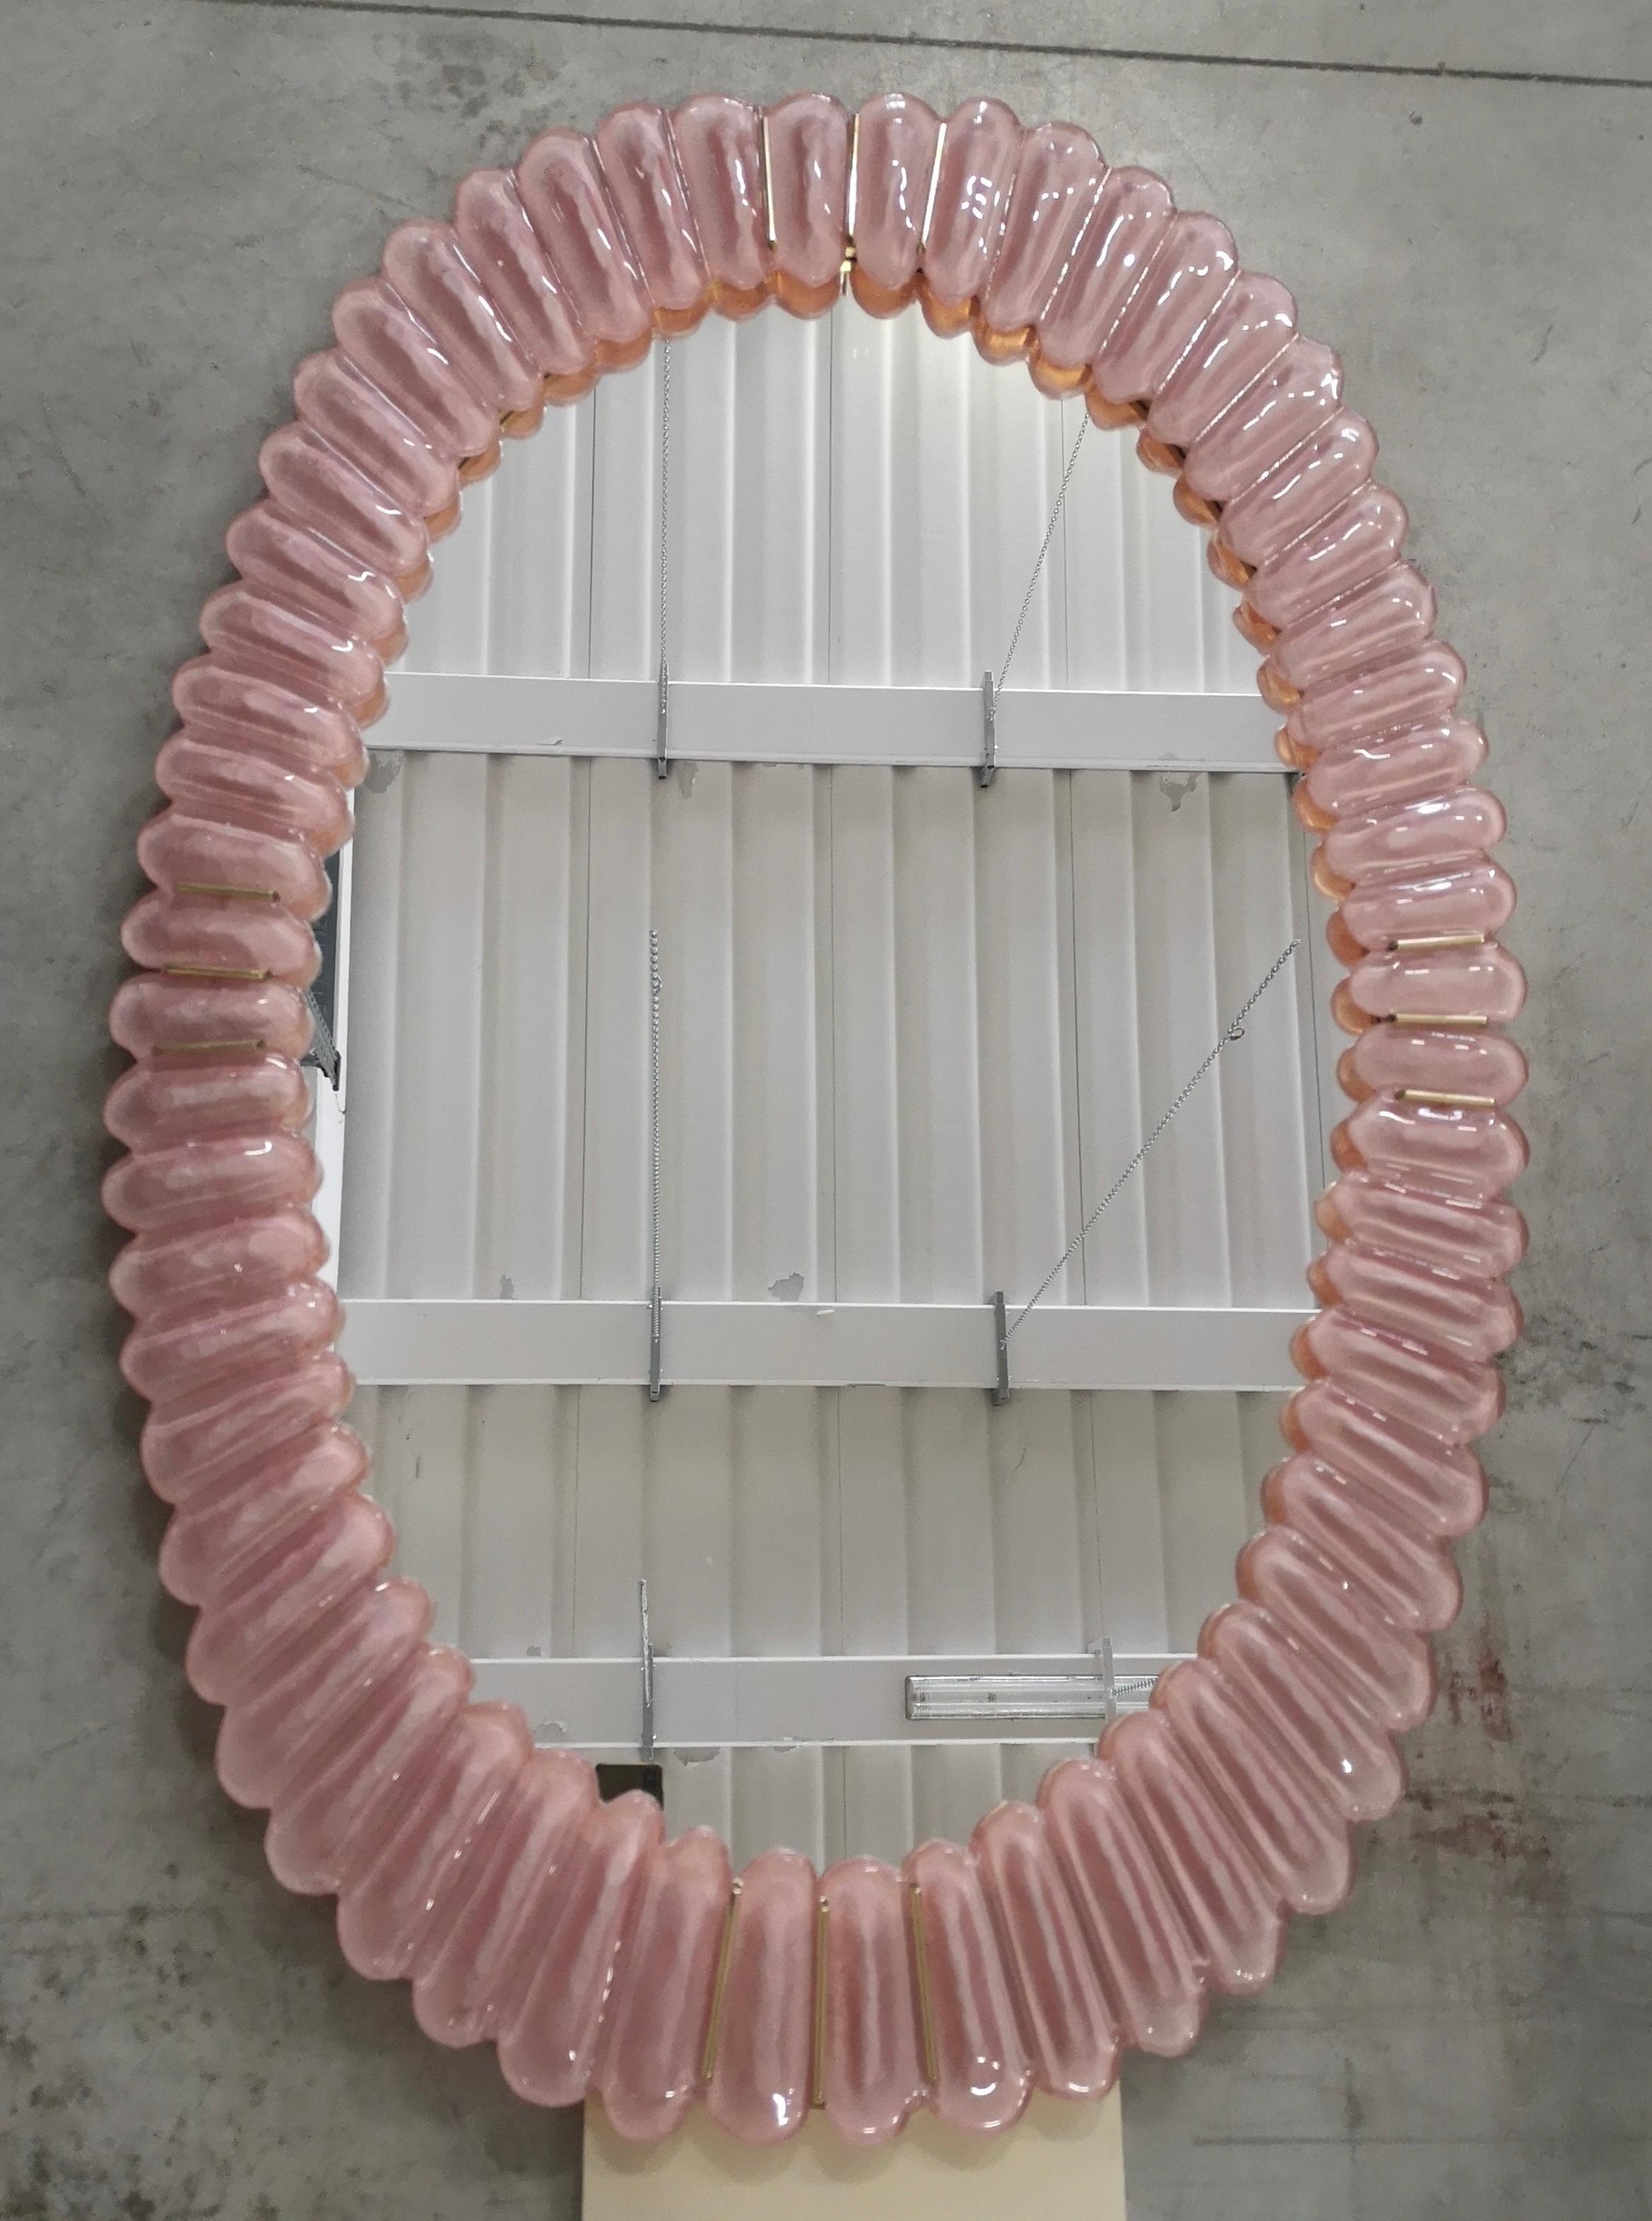 Stunning mirror in blazing pink color Murano glass, Venice. A mirror that alone will furnish your home environment.

The mirror has a rear structure in wood, on which four Murano pink glass sections are mounted to form an oval as in the photograph.